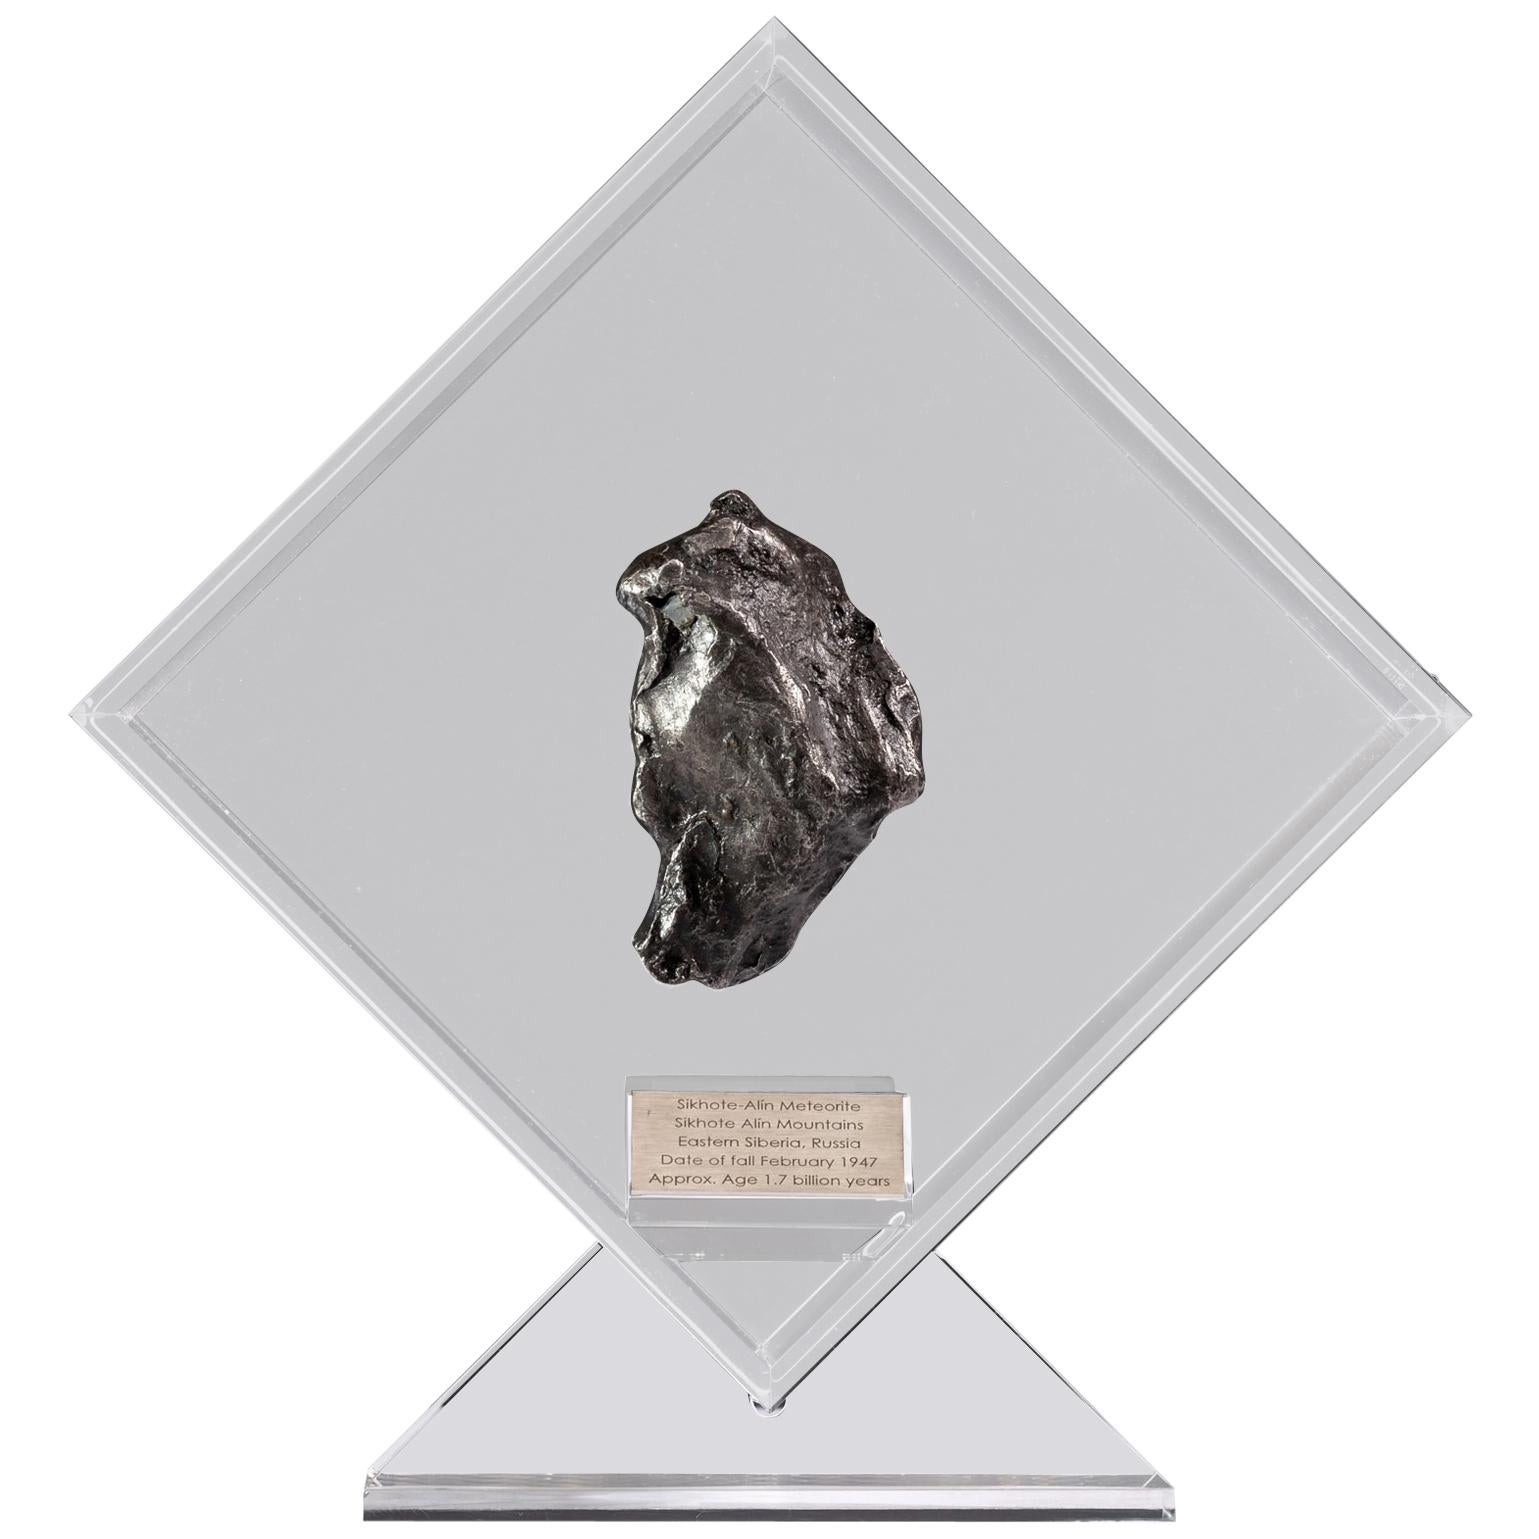 Sikhote Alin Meteorite from Siberia, Russia in a Custom Acrylic Display For Sale